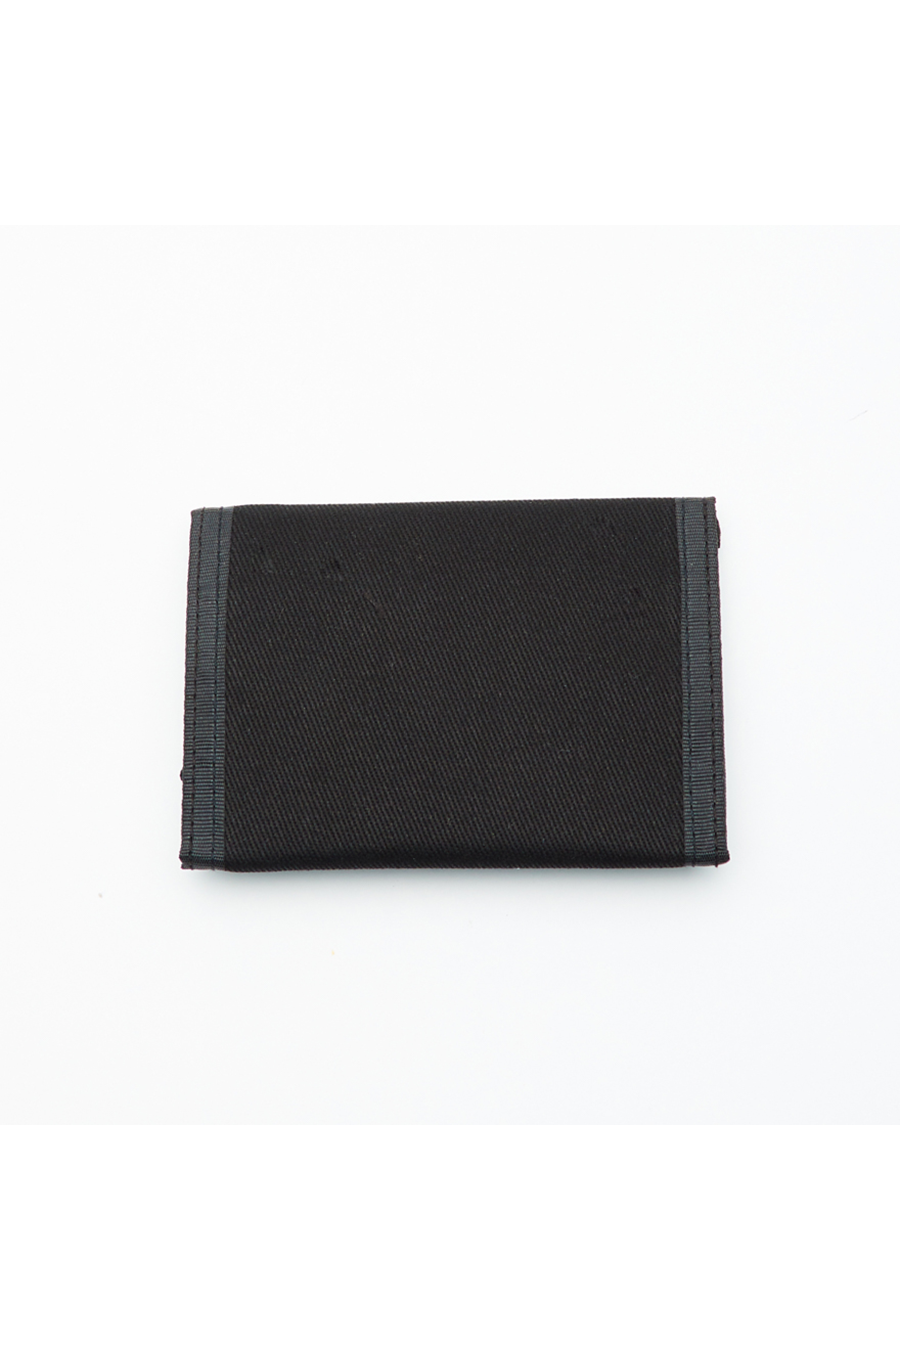 Obey Block Trifold Wallet | Black - Main Image Number 2 of 2